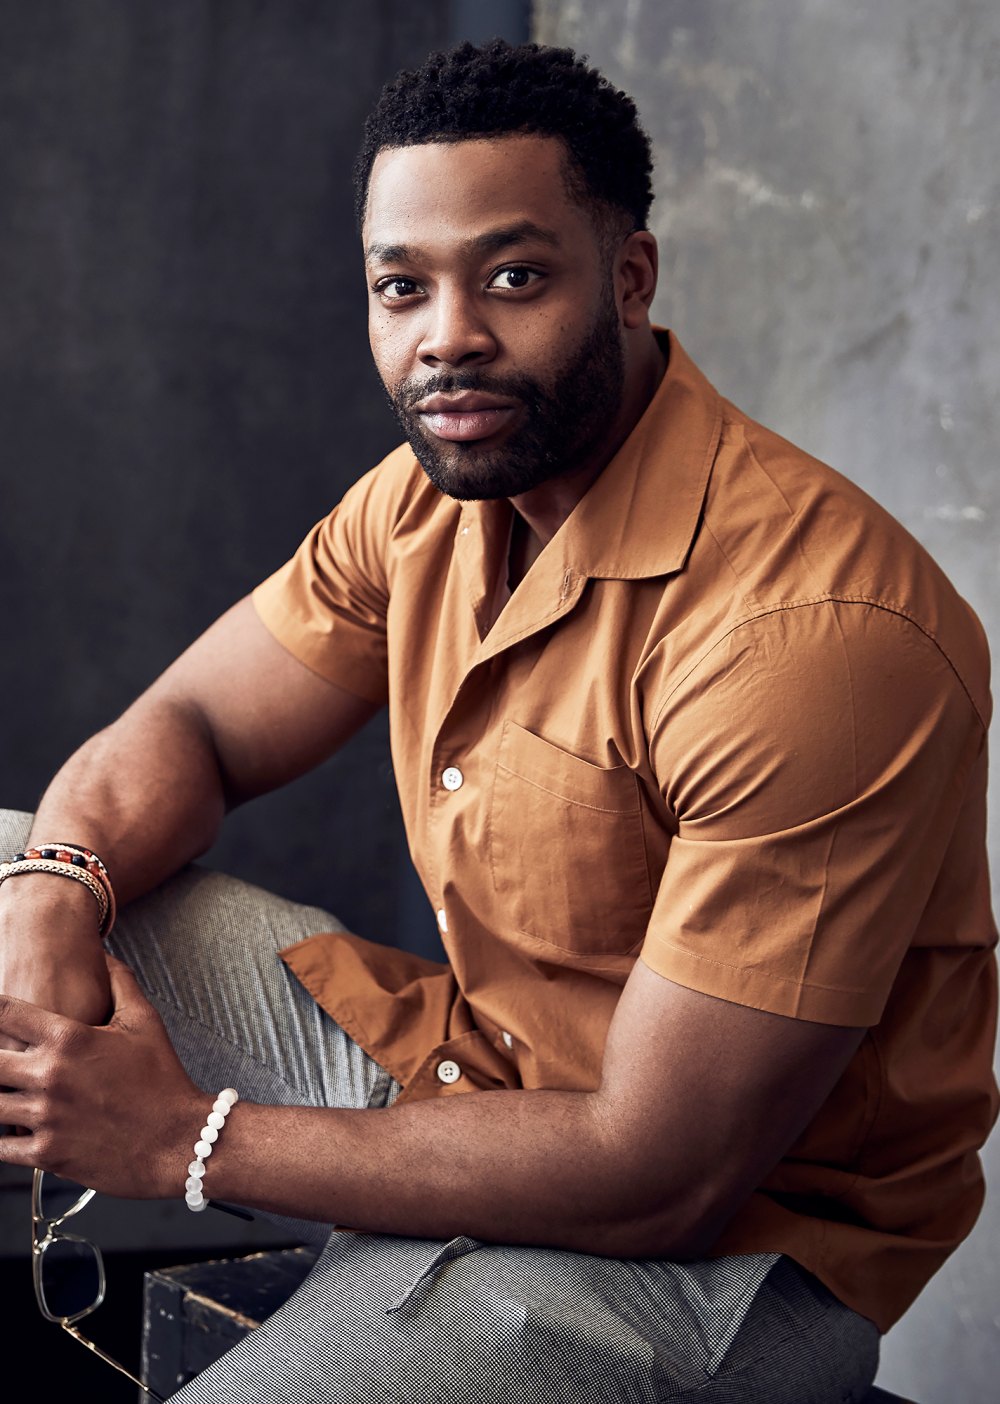 Chicago P.D.’s LaRoyce Hawkins Says His Son Roman ‘Definitely’ Has the Acting Bug: ‘He Does His Own Stunts’